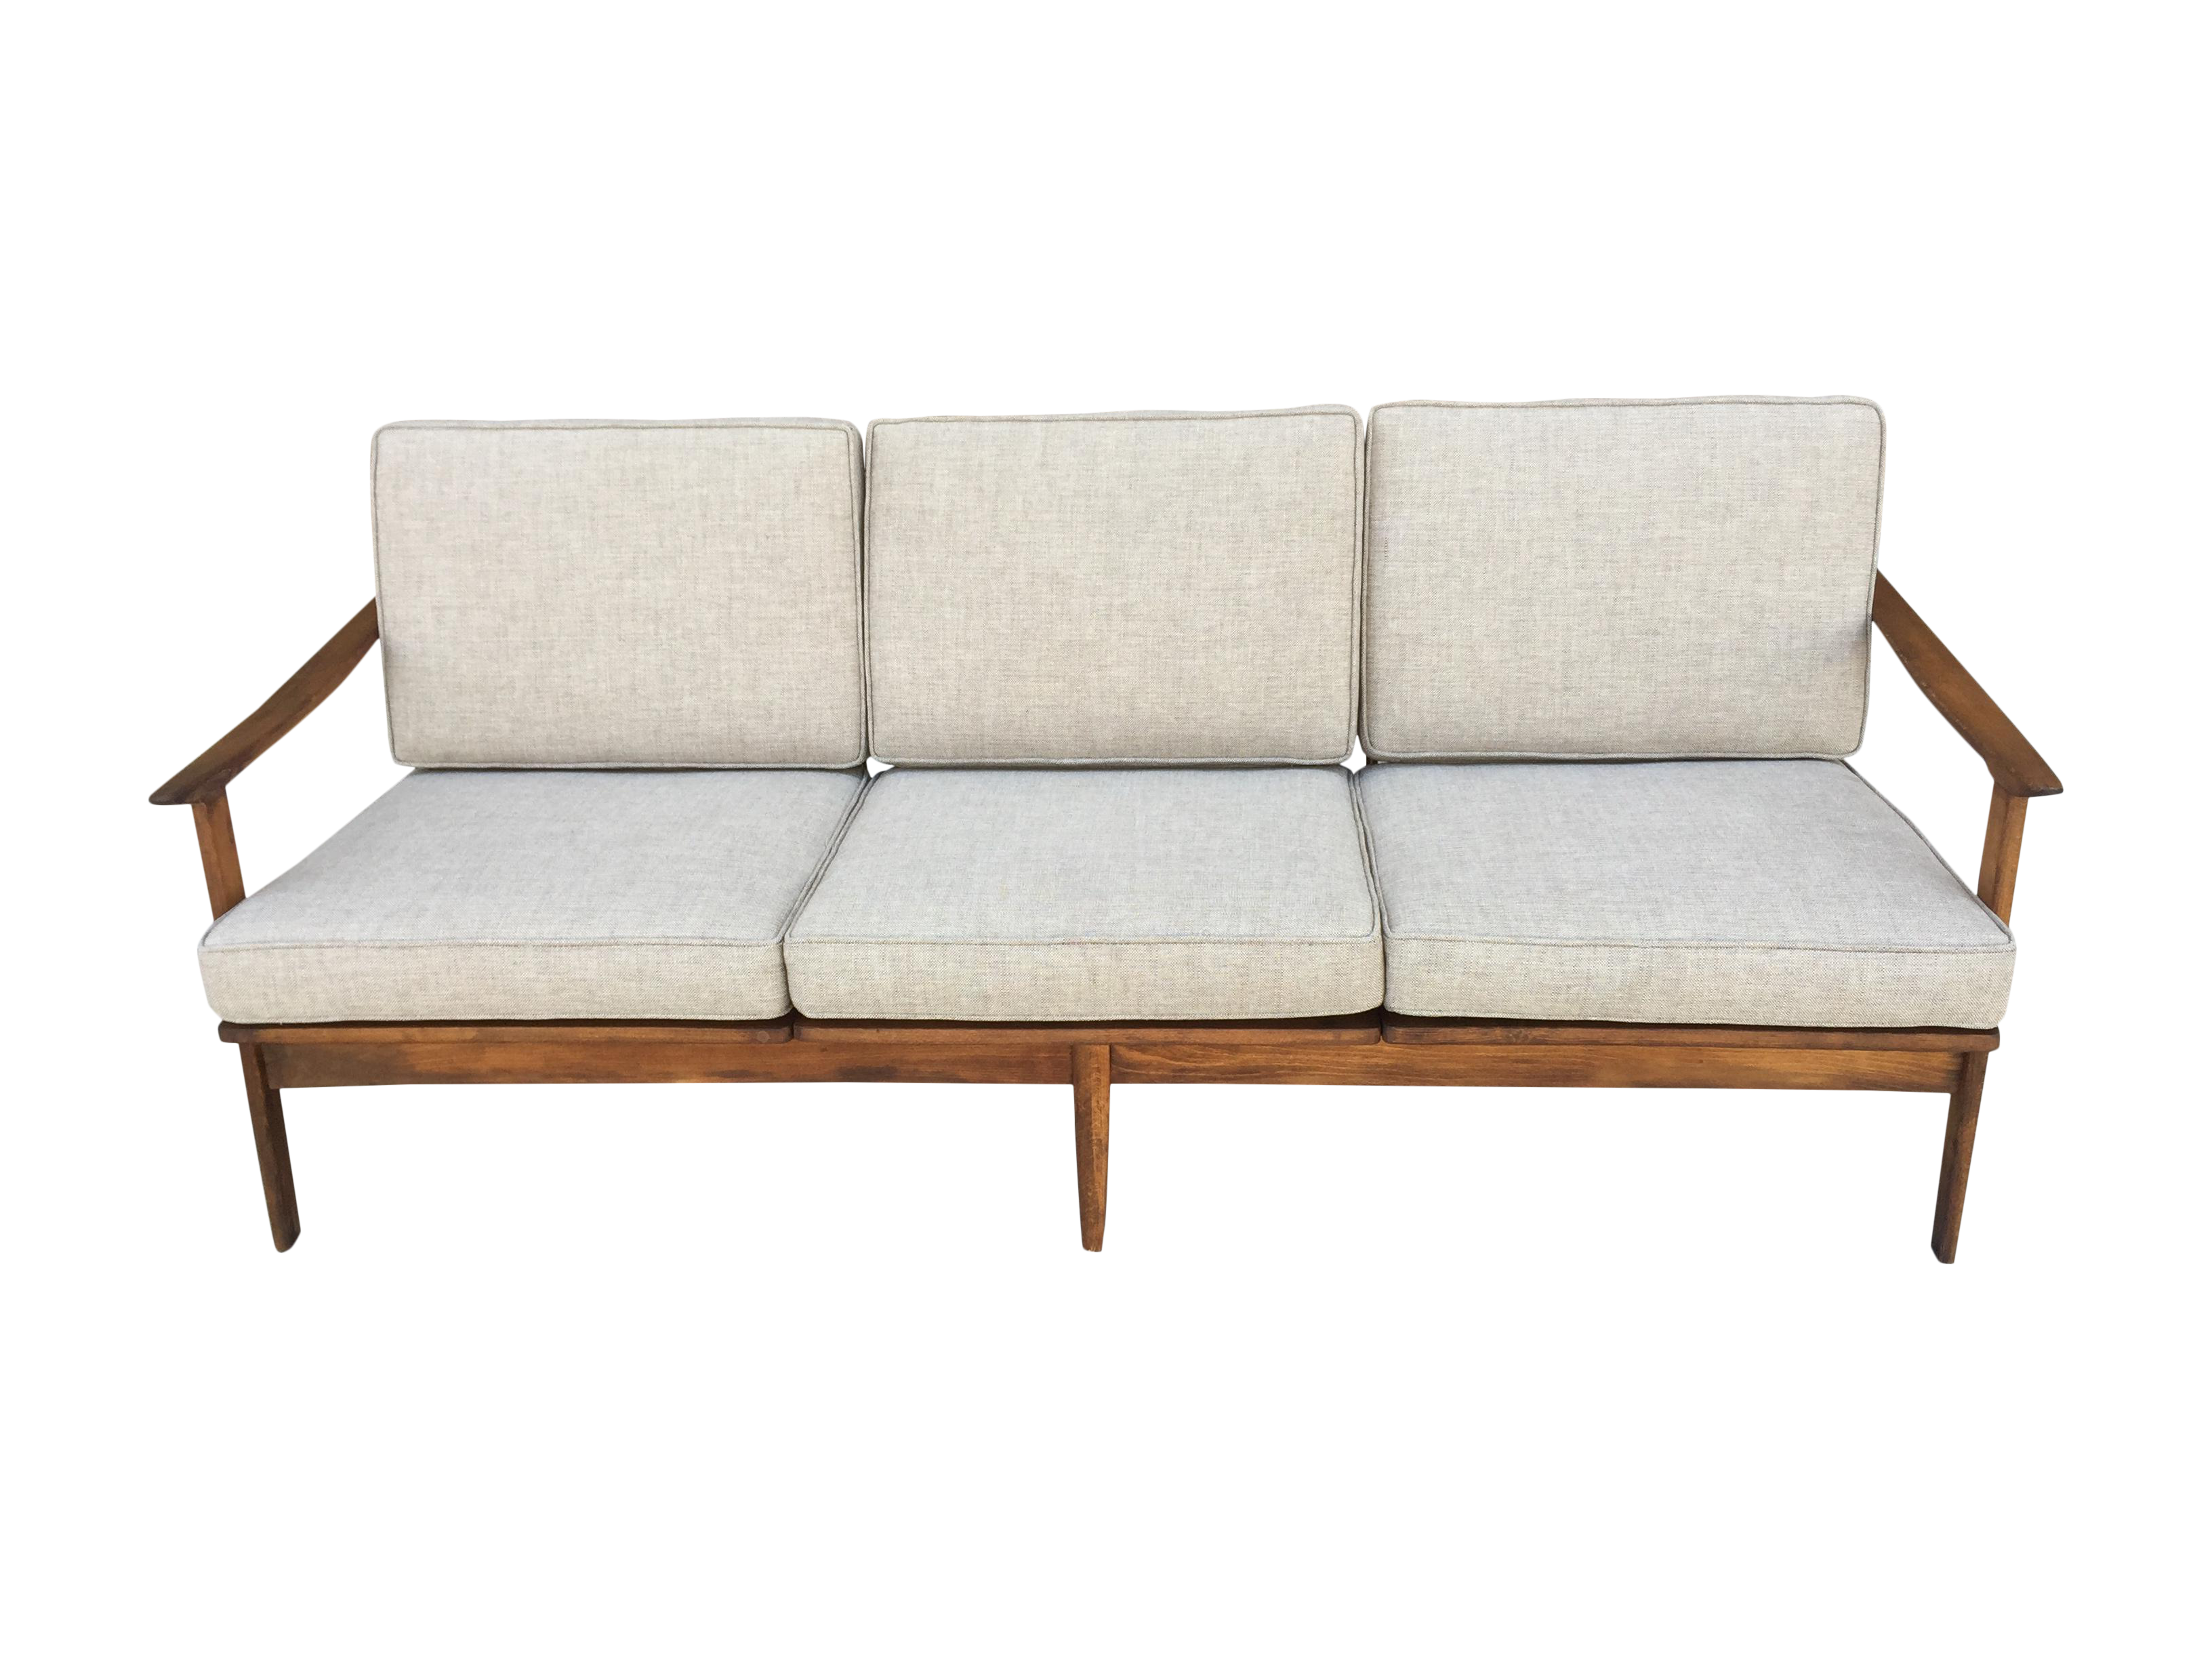 Mid Century Modern Three Seater Sofa On Chairish Outdoor Sofa Pertaining To Mid Century 3 Seat Couches (Gallery 5 of 20)